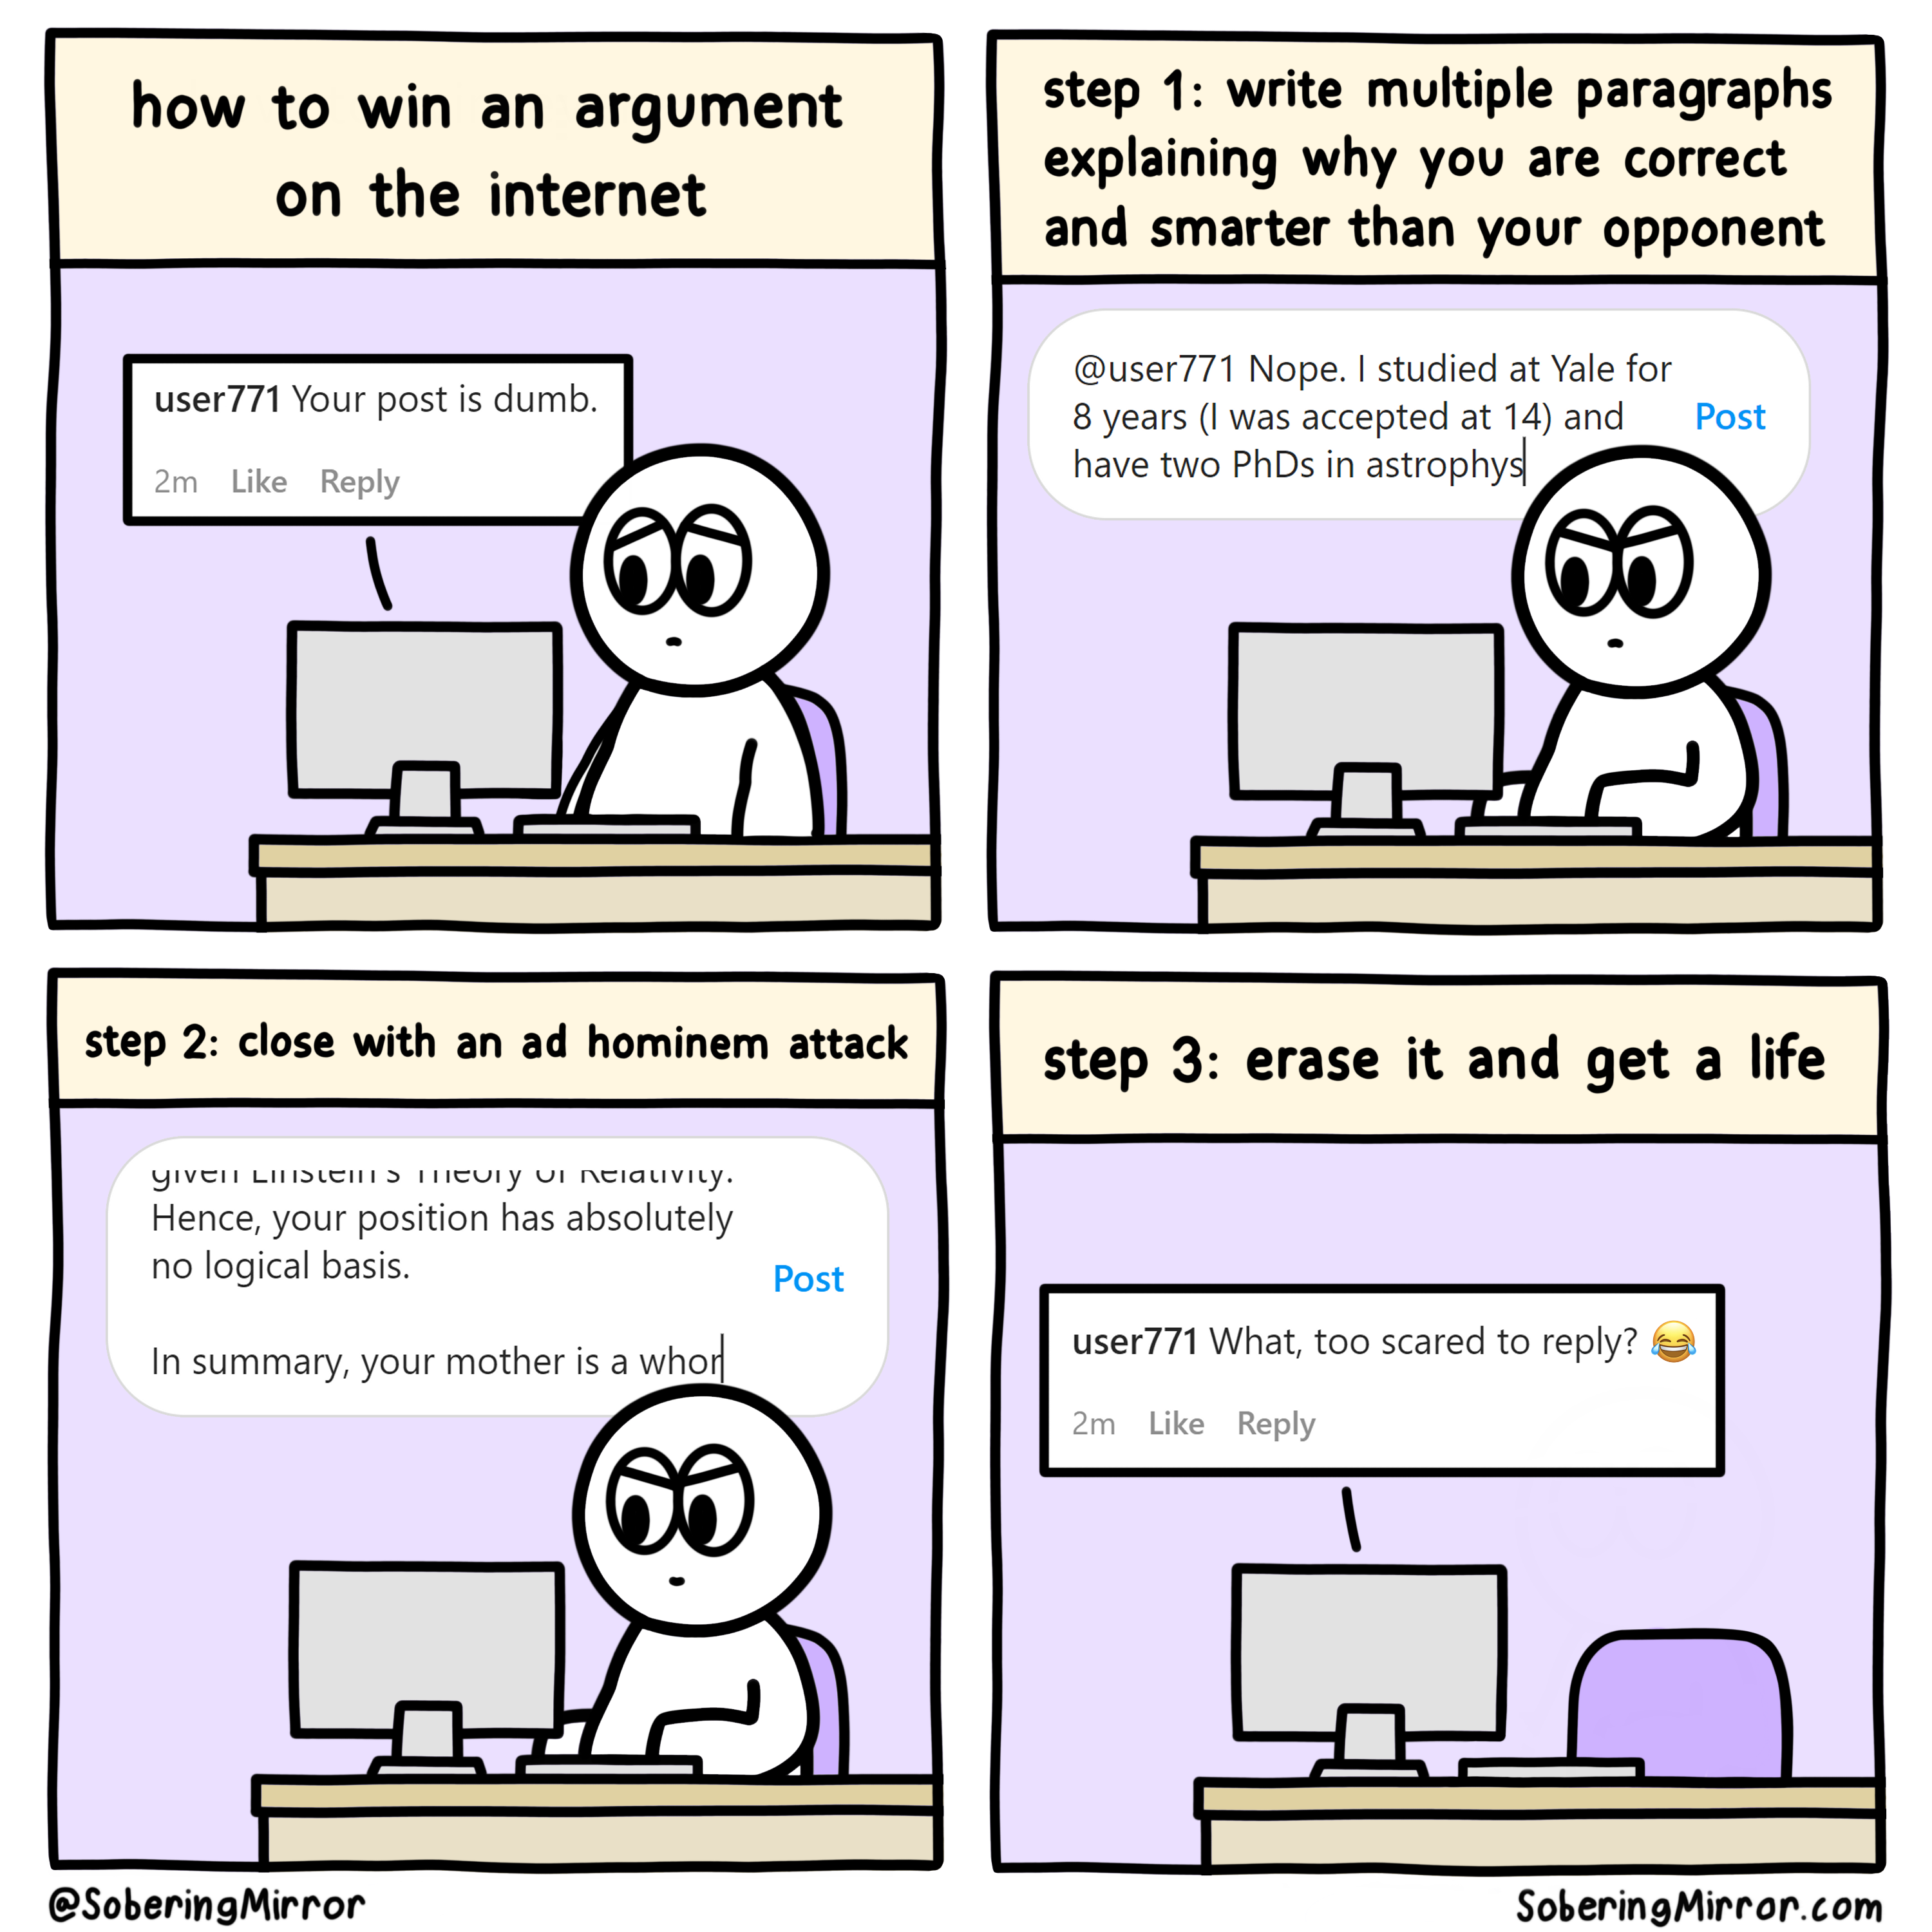 "How to win an argument online"